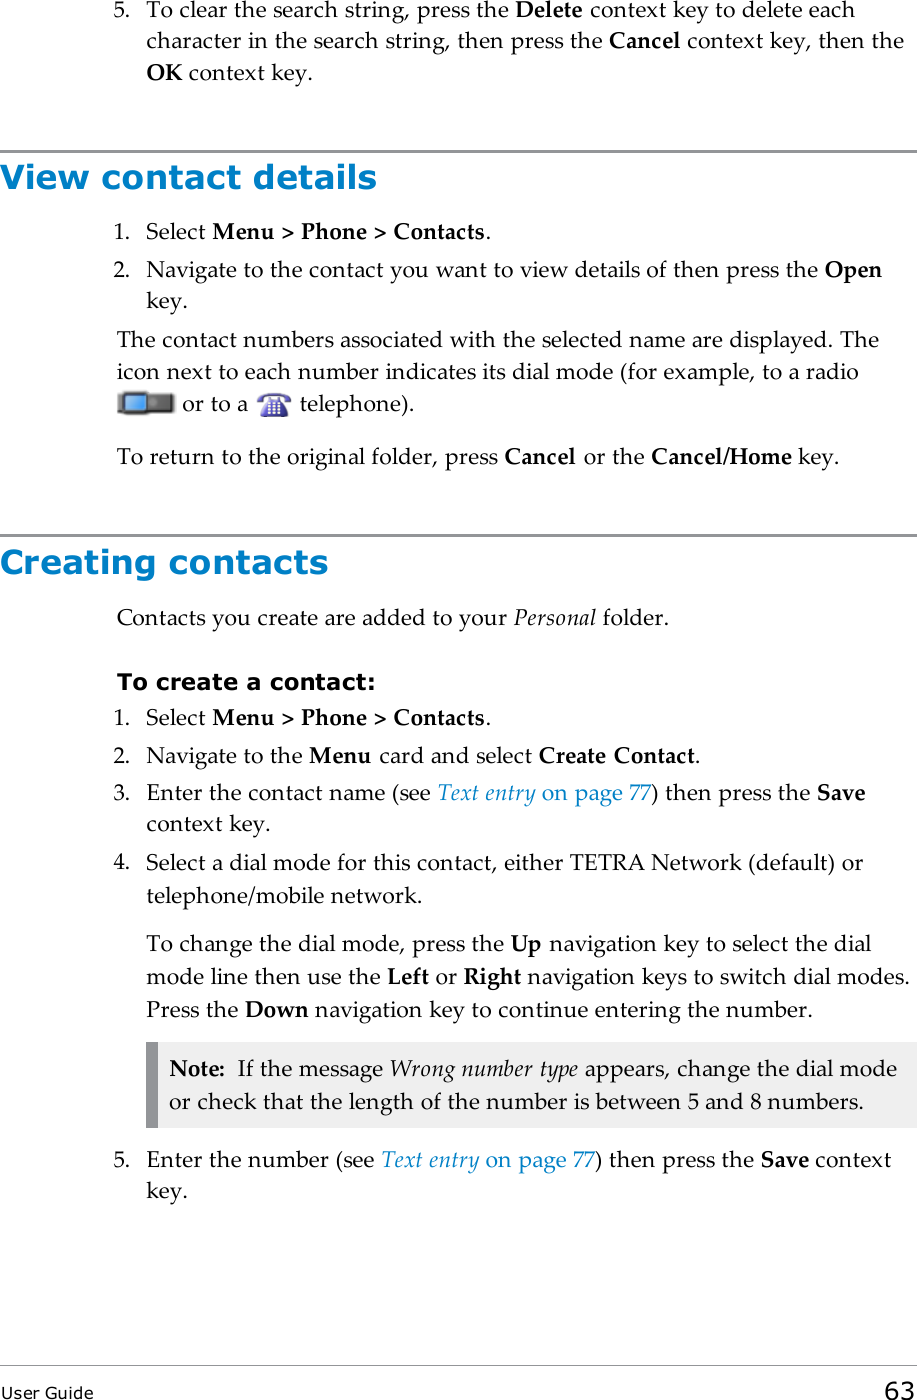 5. To clear the search string, press the Delete context key to delete eachcharacter in the search string, then press the Cancel context key, then theOK context key.View contact details1. Select Menu &gt; Phone &gt; Contacts.2. Navigate to the contact you want to view details of then press the Openkey.The contact numbers associated with the selected name are displayed. Theicon next to each number indicates its dial mode (for example, to a radioor to a telephone).To return to the original folder, press Cancel or the Cancel/Home key.Creating contactsContacts you create are added to your Personal folder.To create a contact:1. Select Menu &gt; Phone &gt; Contacts.2. Navigate to the Menu card and select Create Contact.3. Enter the contact name (see Text entry on page77) then press the Savecontext key.4. Select a dial mode for this contact, either TETRA Network (default) ortelephone/mobile network.To change the dial mode, press the Up navigation key to select the dialmode line then use the Left or Right navigation keys to switch dial modes.Press the Down navigation key to continue entering the number.Note: If the message Wrong number type appears, change the dial modeor check that the length of the number is between 5 and 8 numbers.5. Enter the number (see Text entry on page77) then press the Save contextkey.User Guide 63